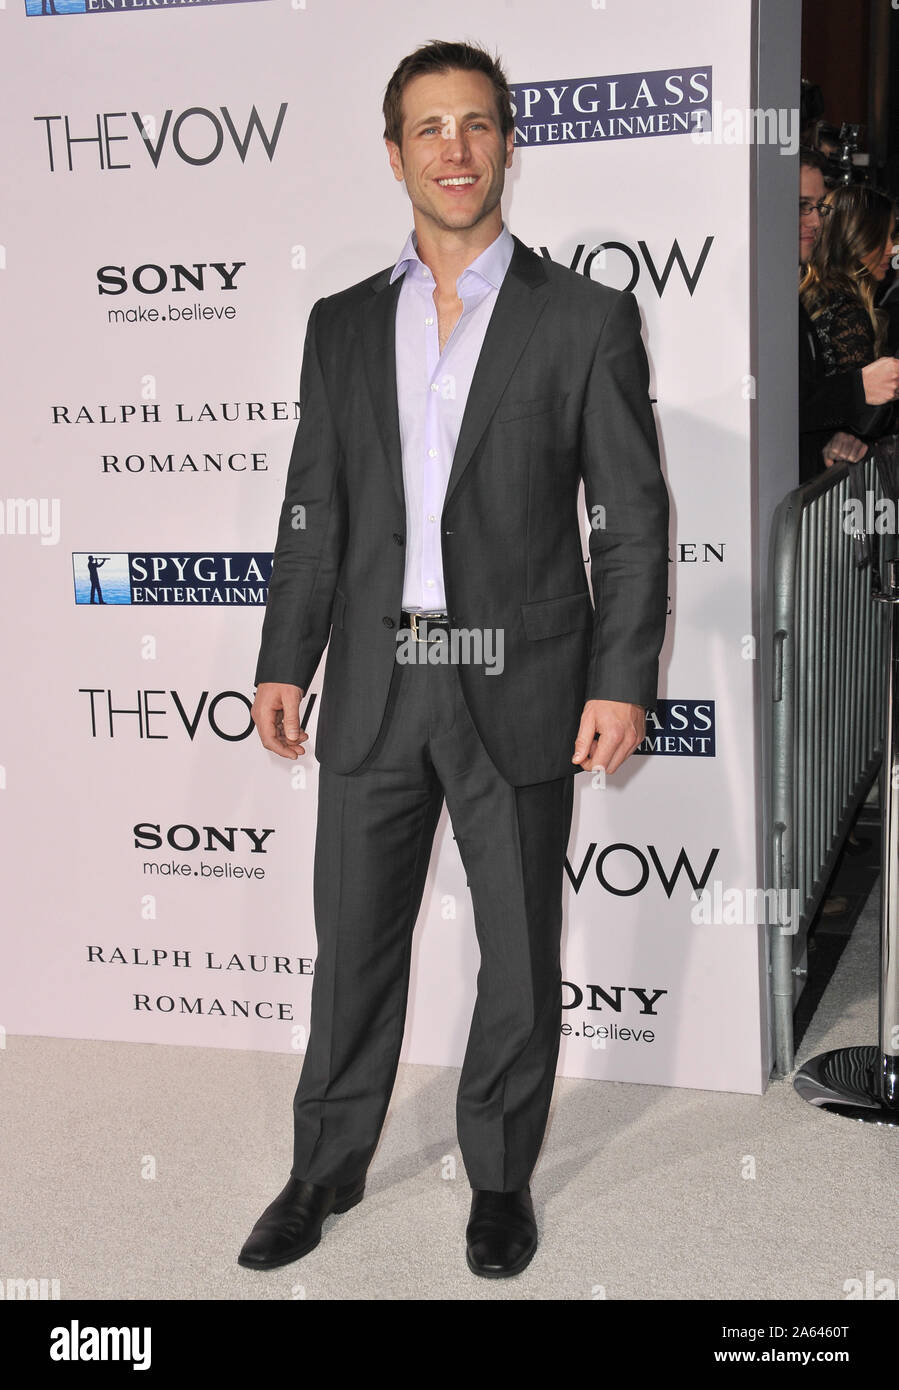 LOS ANGELES, CA. February 06, 2012: Jake Pavelka at the world premiere of 'The Vow' at Grauman's Chinese Theatre, Hollywood. © 2012 Paul Smith / Featureflash Stock Photo